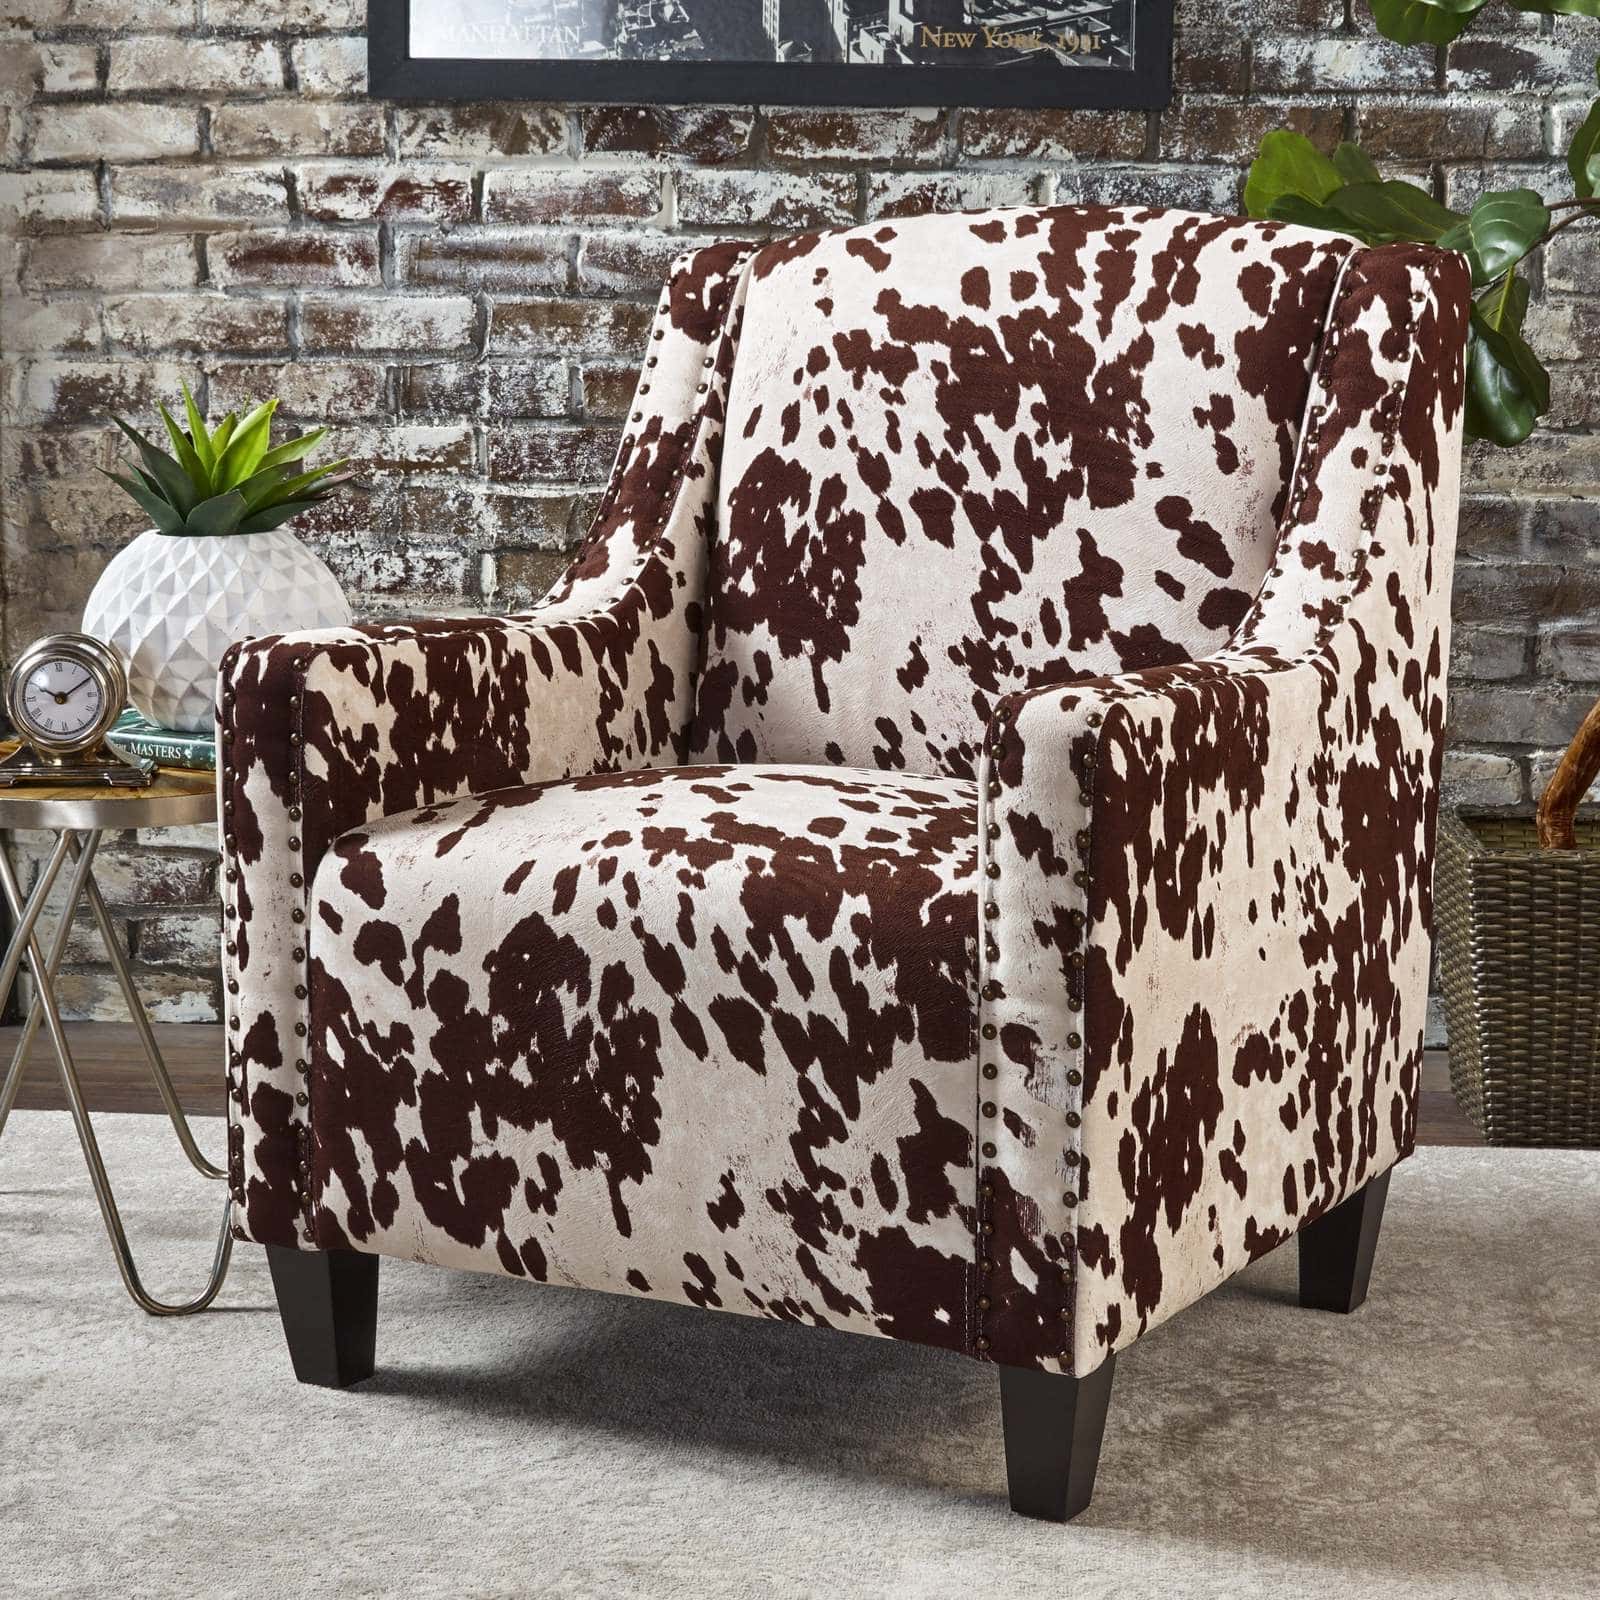 Make a Statement with Velvet Cow Print